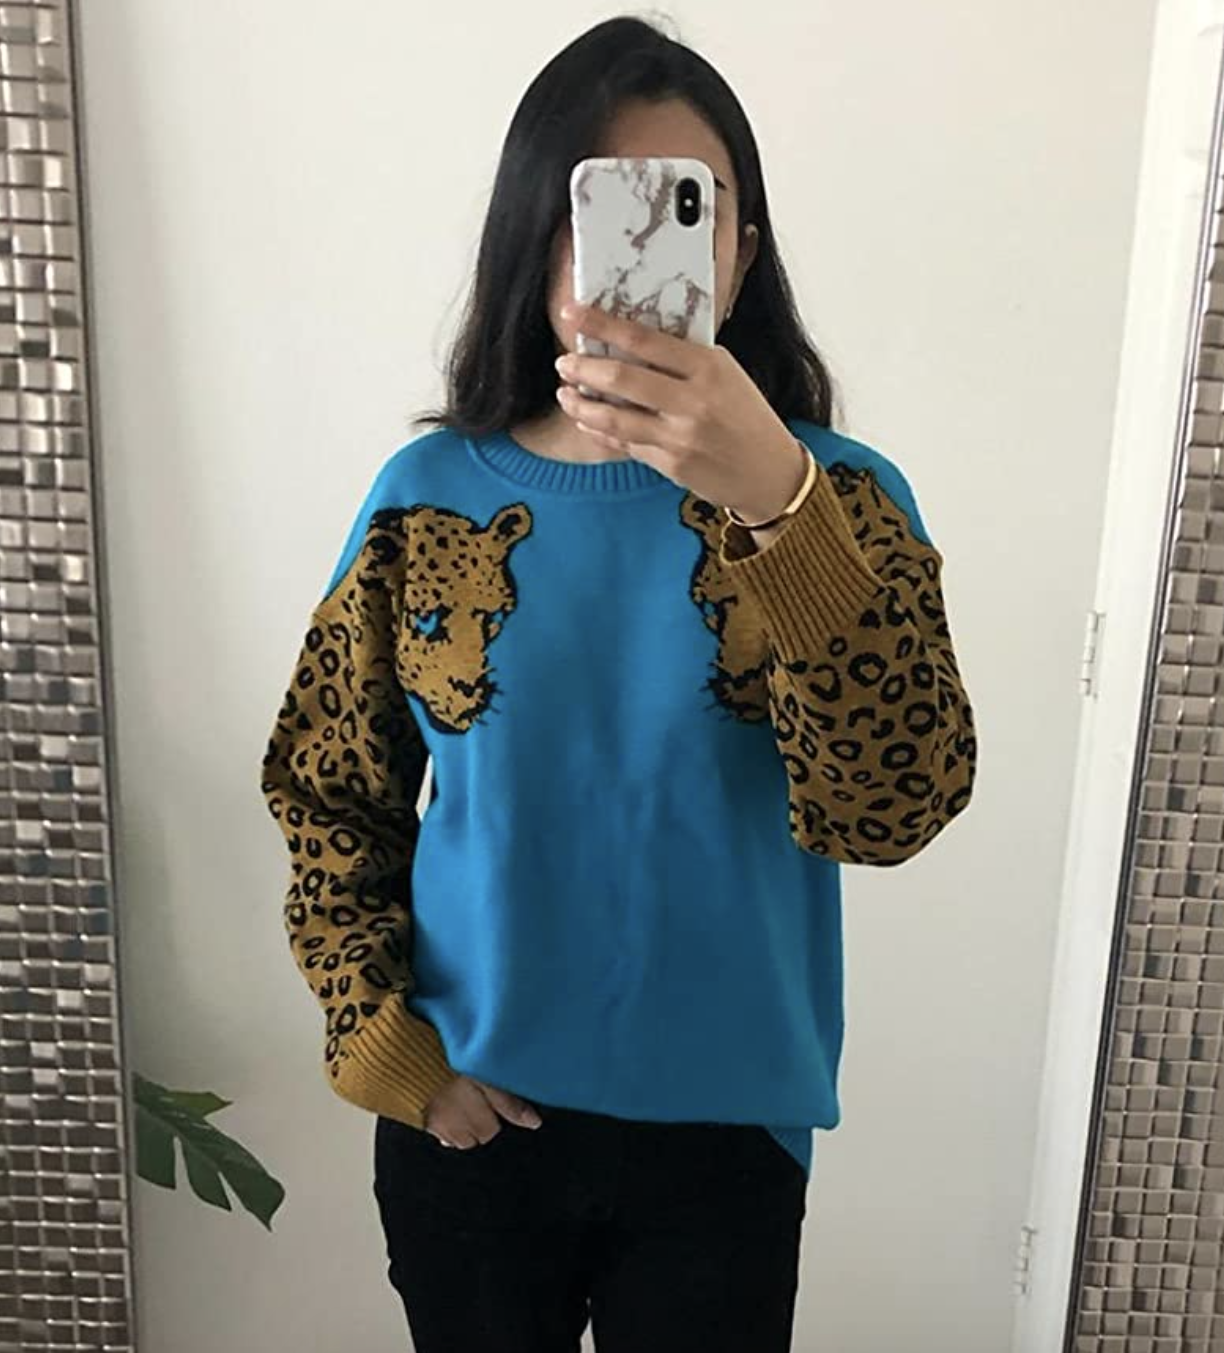 reviewer wearing the blue sweater with leopard illustration on sleeves